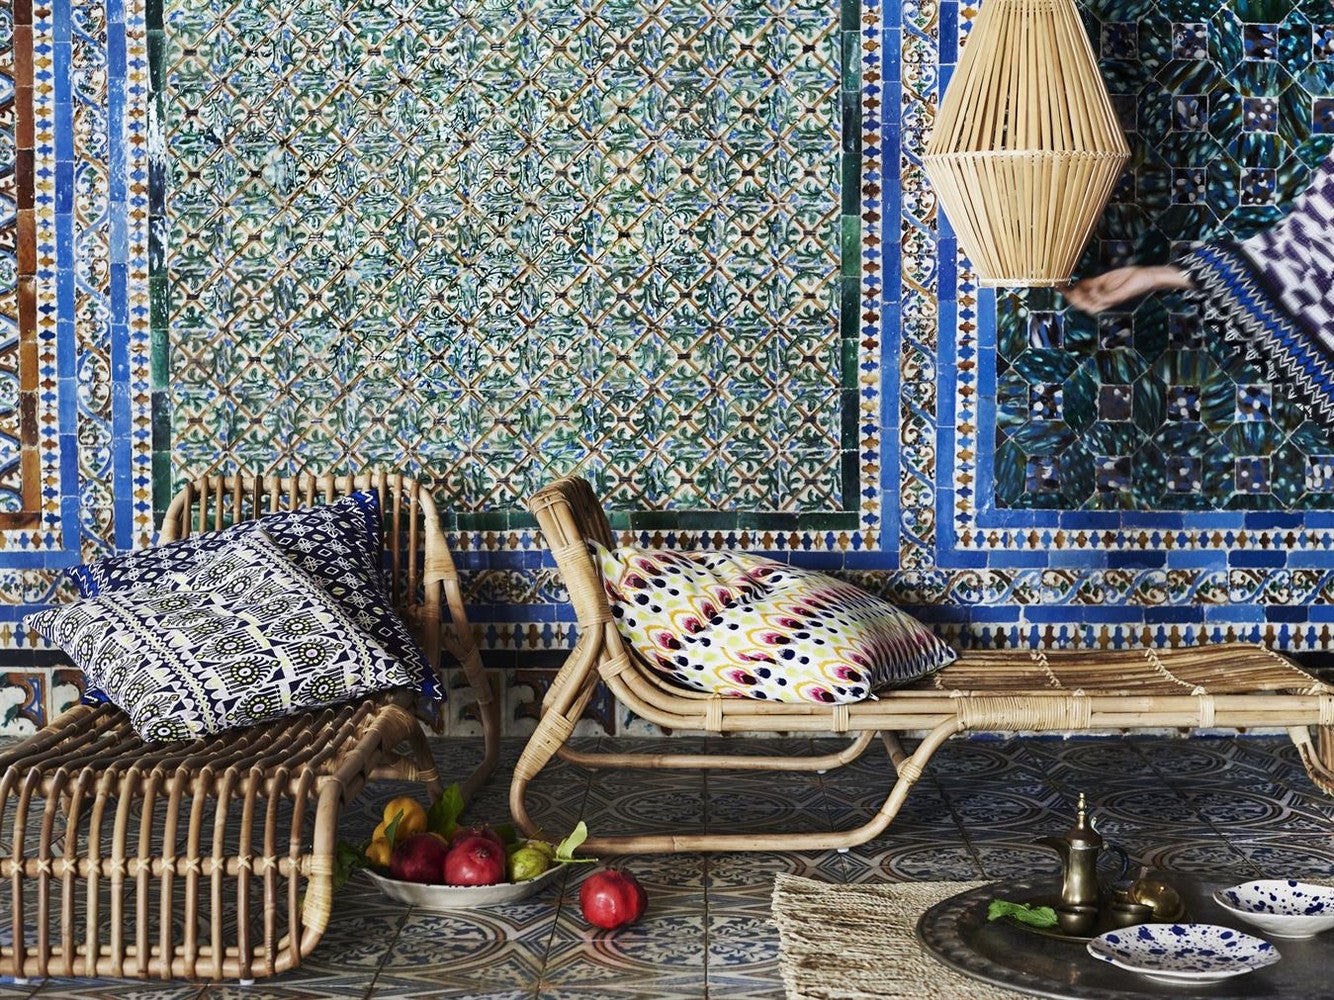 IKEA Unveils Two New Collections Just In Time For A Spring Refresh: JASSA and Summer 2017 IKEA